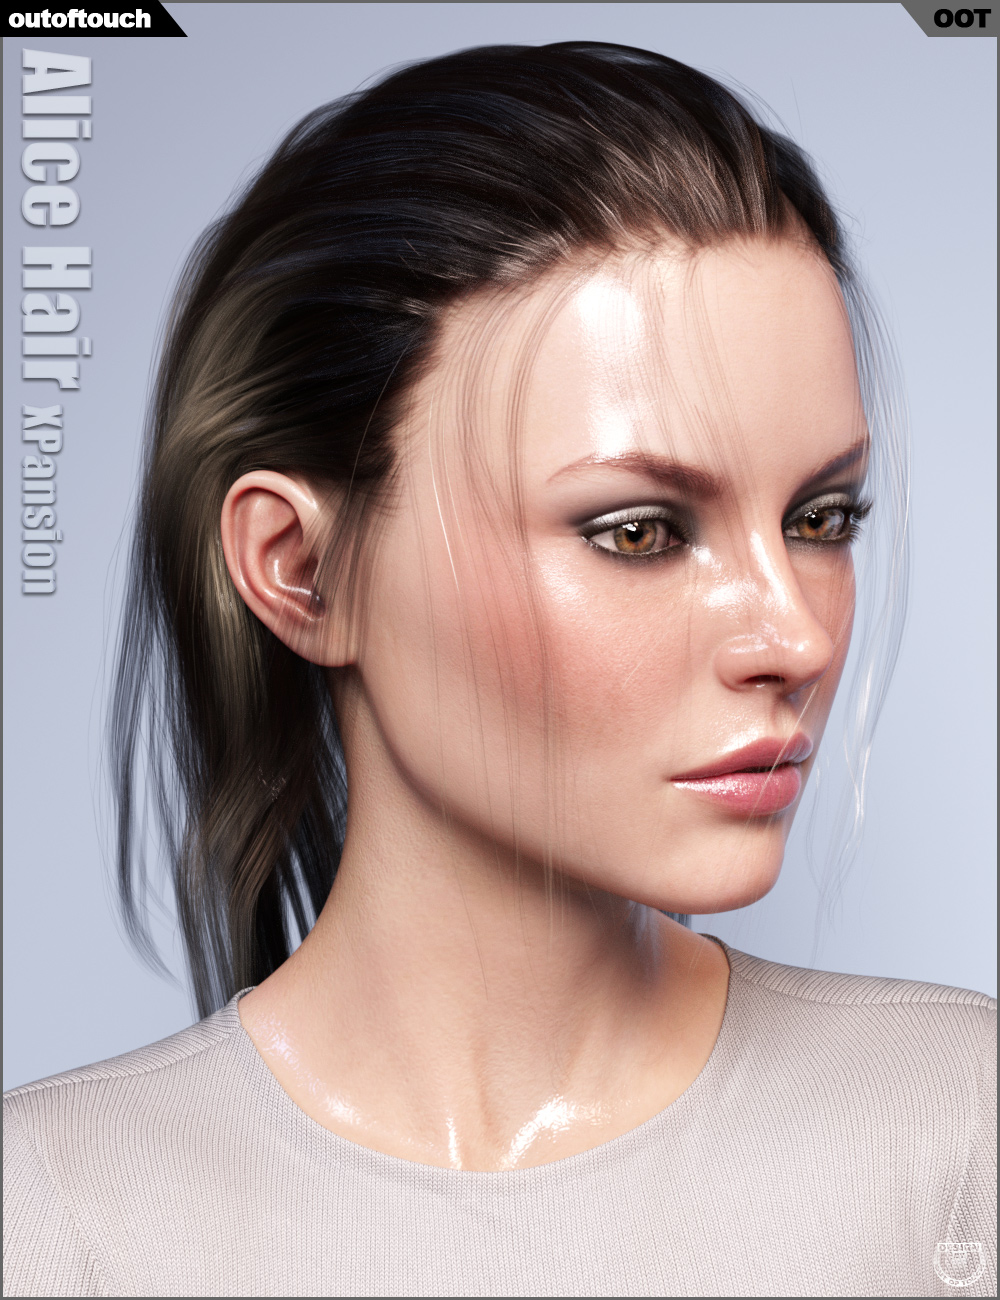 OOT Hairblending 2.0 Texture XPansion for Alice Wet and Dry Hair by: outoftouch, 3D Models by Daz 3D